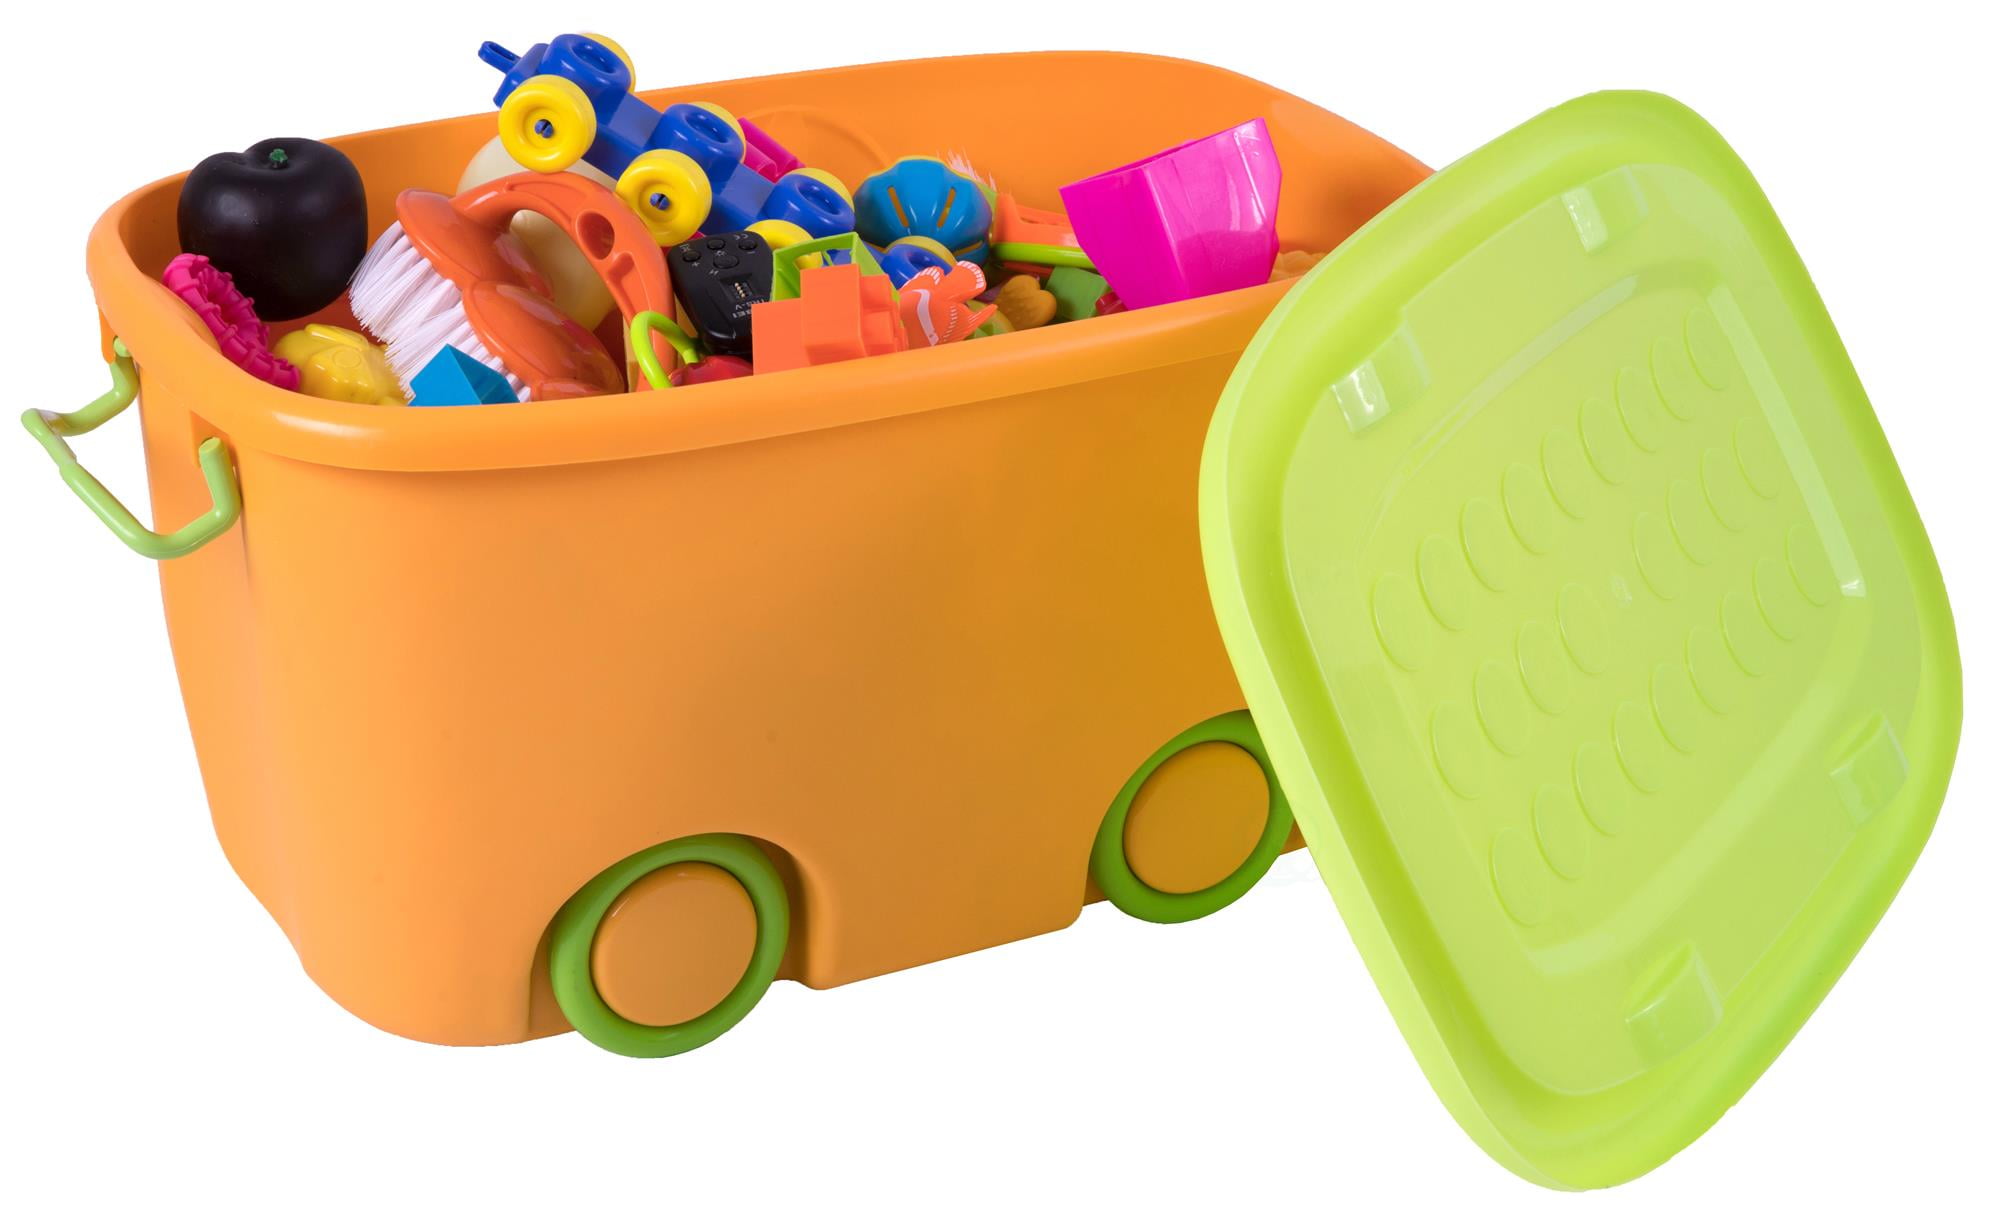 toy storage containers